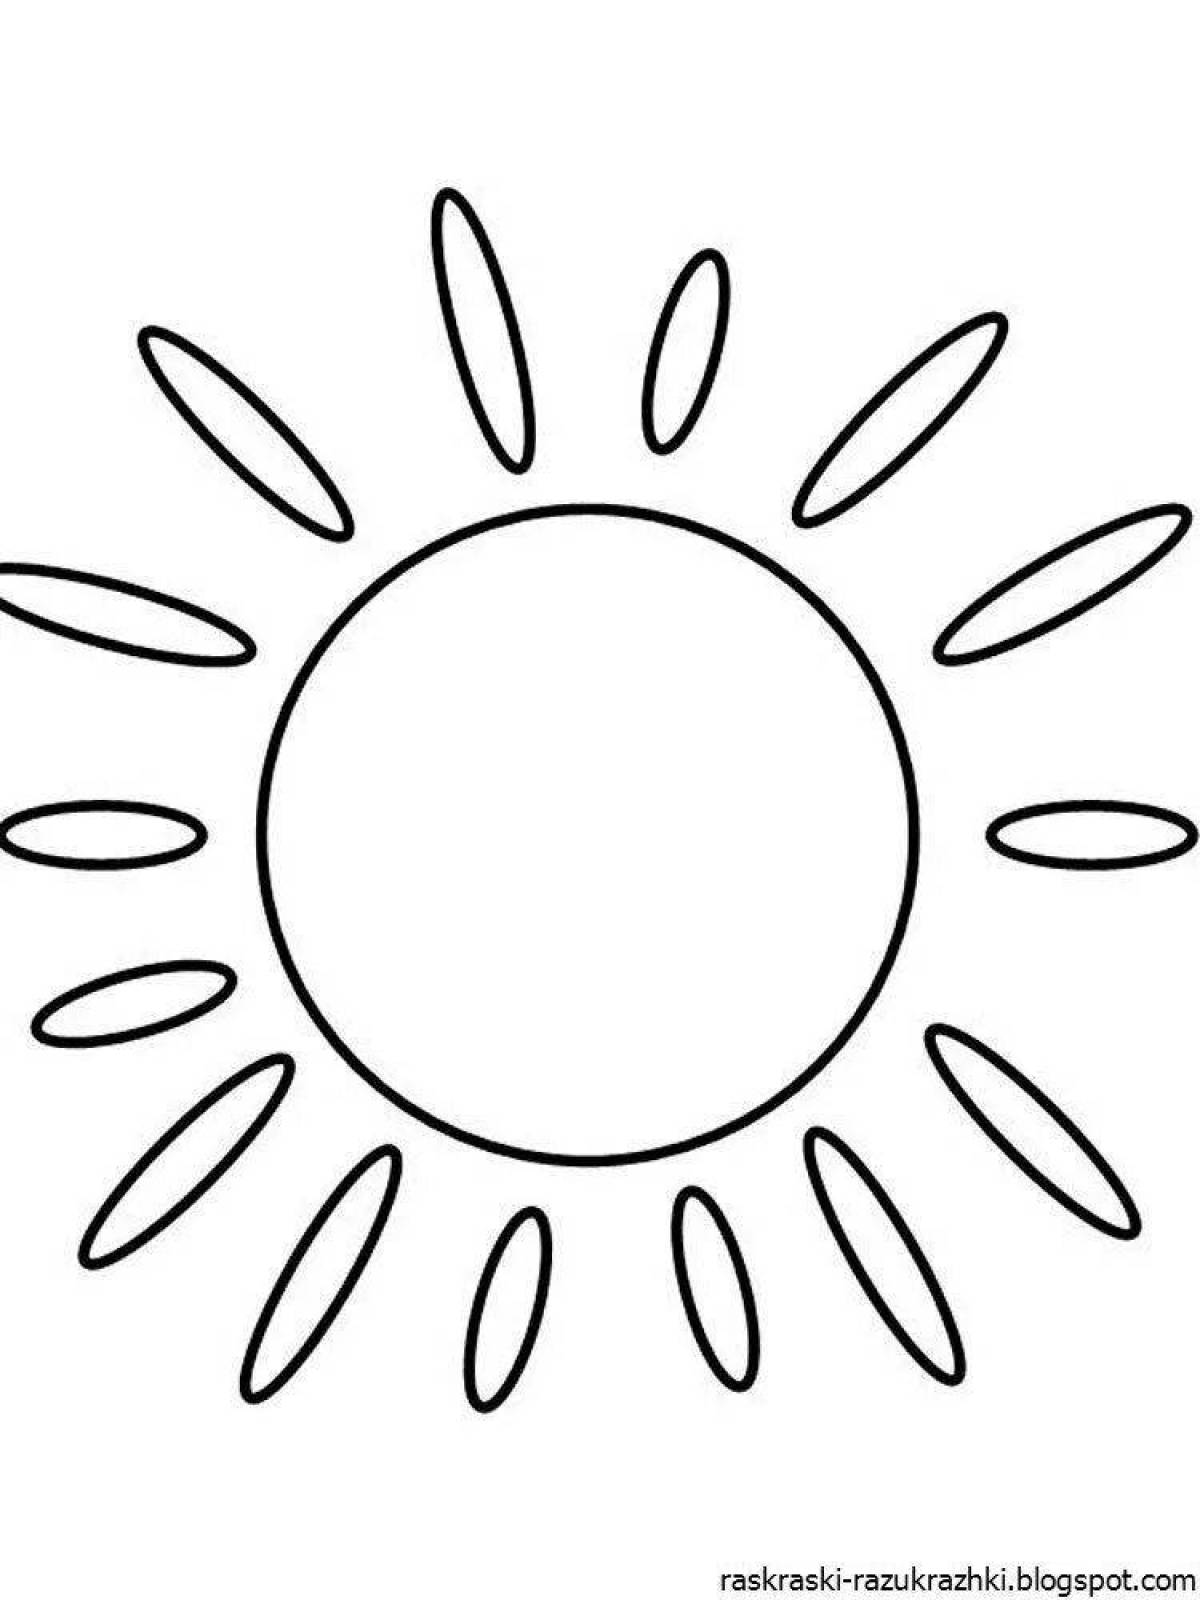 Glorious coloring picture of the sun